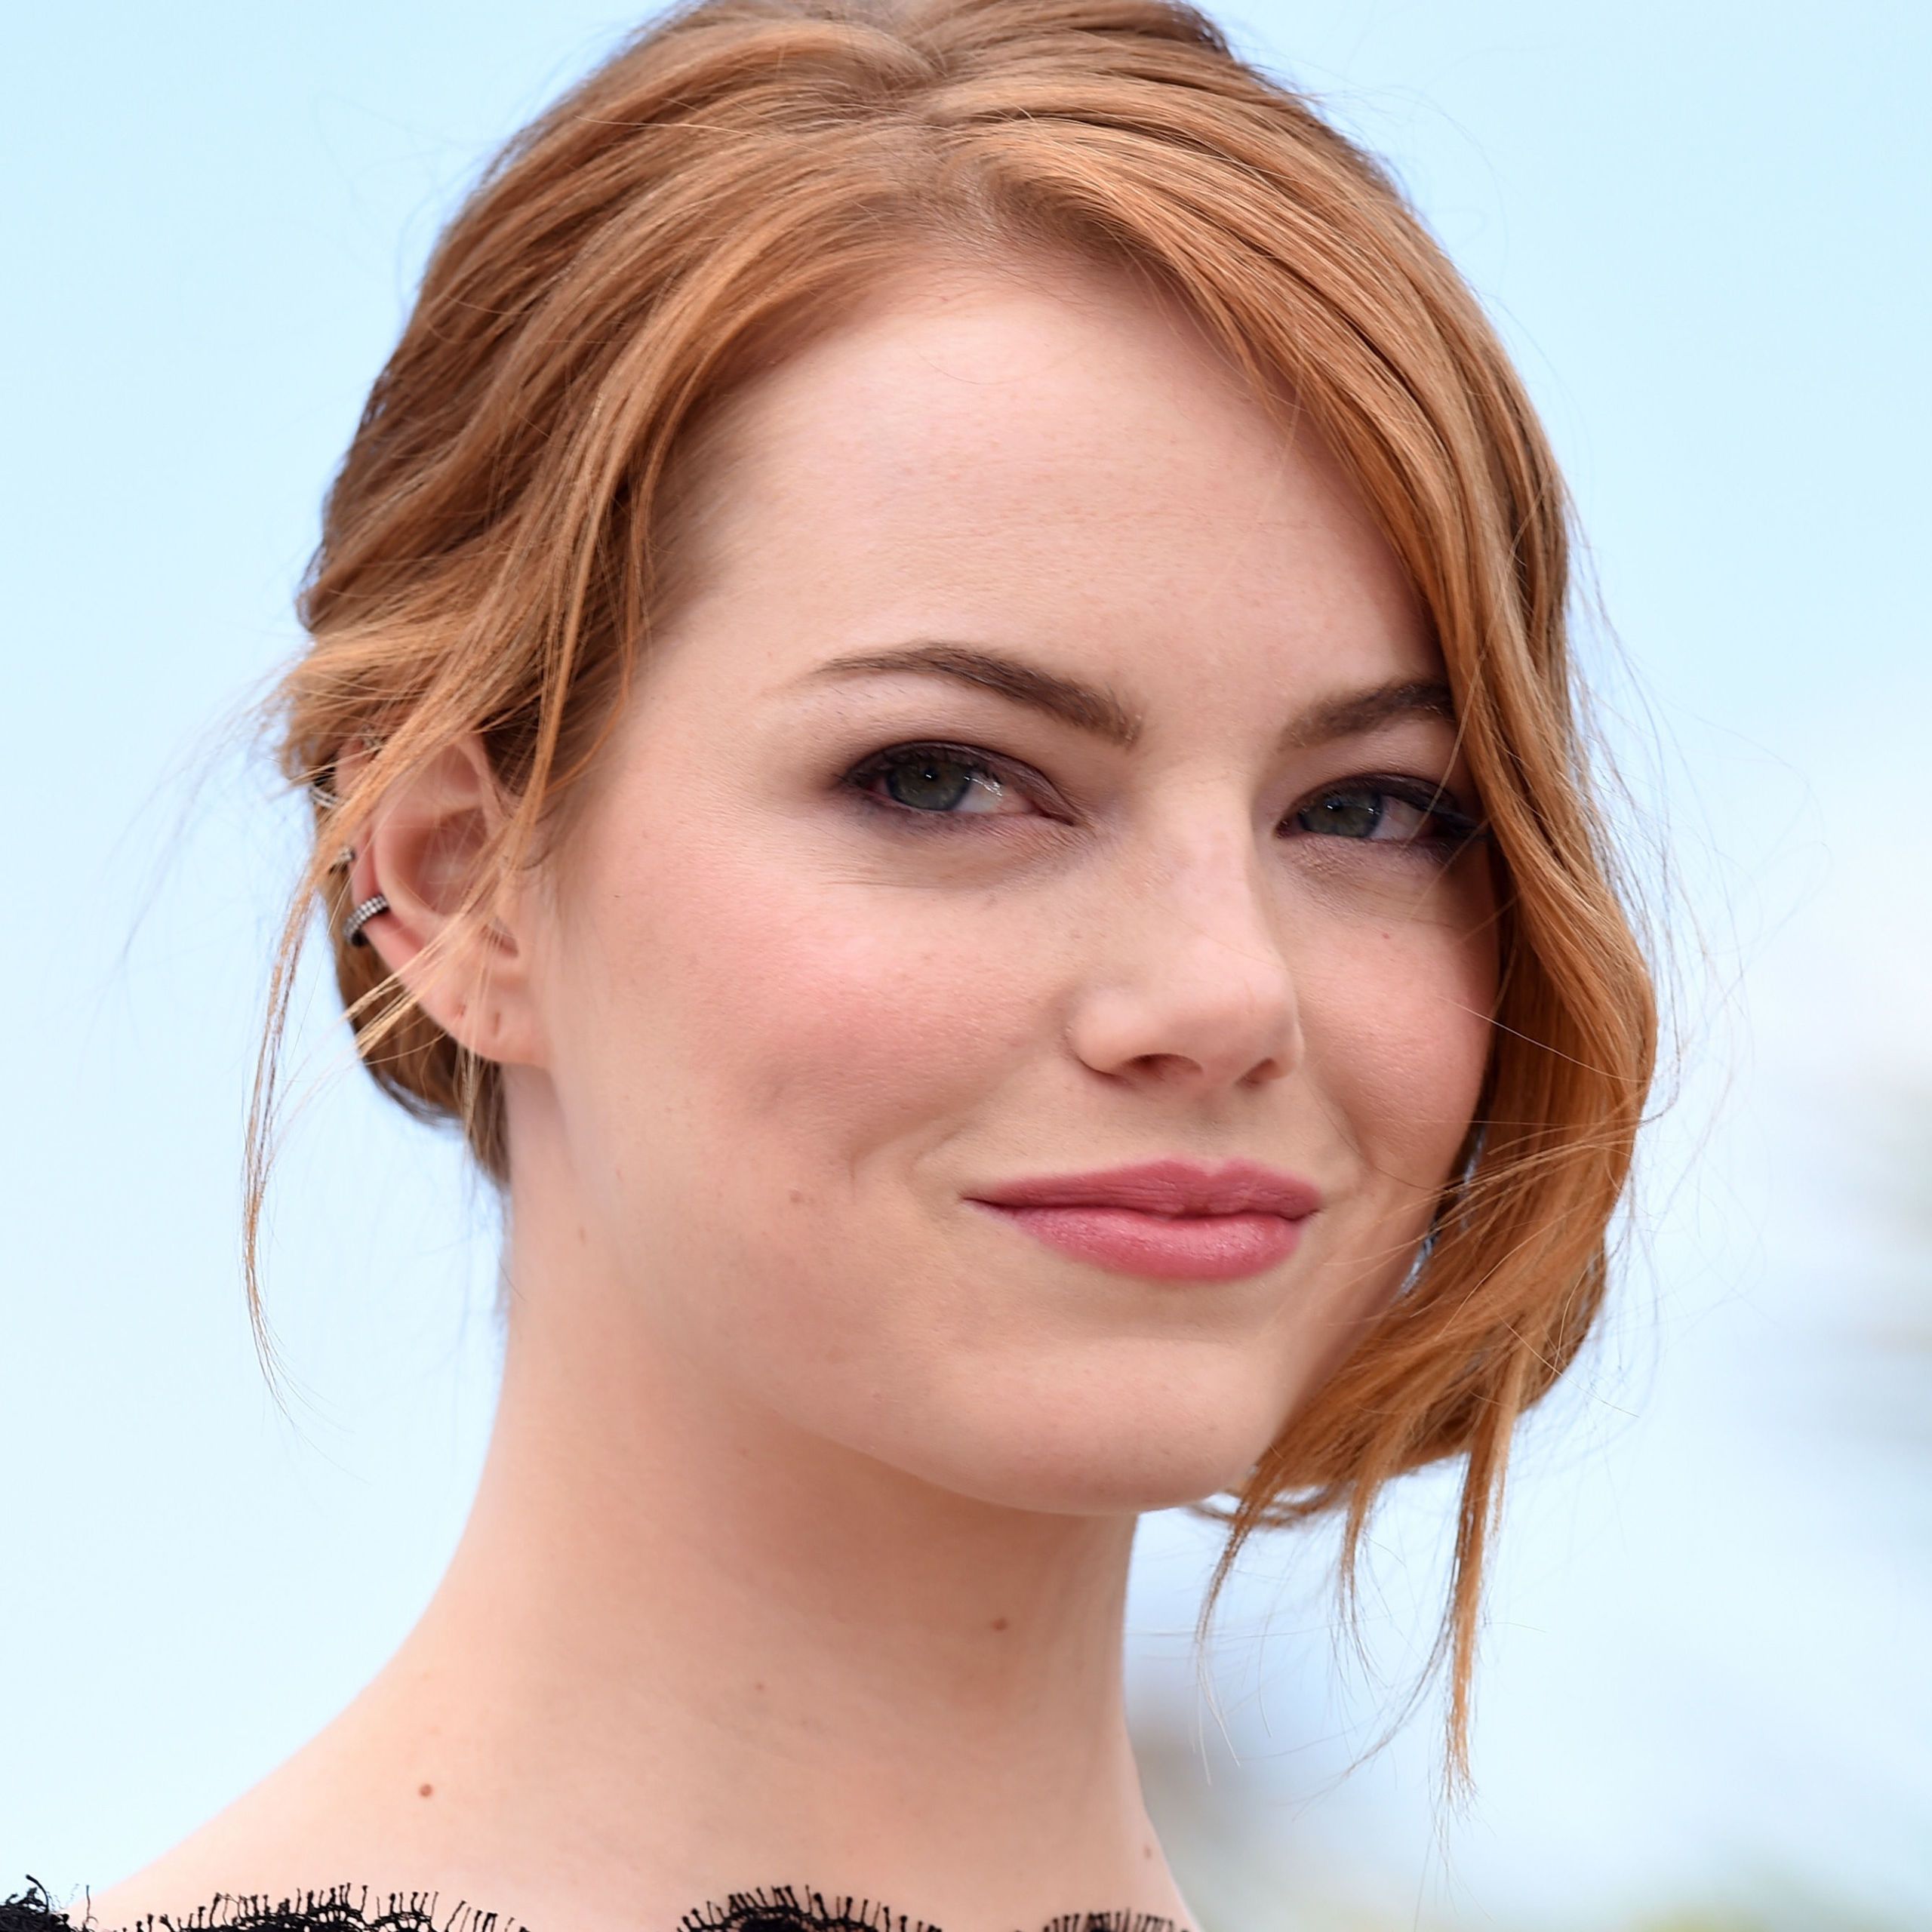 Emma Stone Nude Sex - What Is Emma Stone's Real Name - Emma Stone's Fake Name | Marie Claire